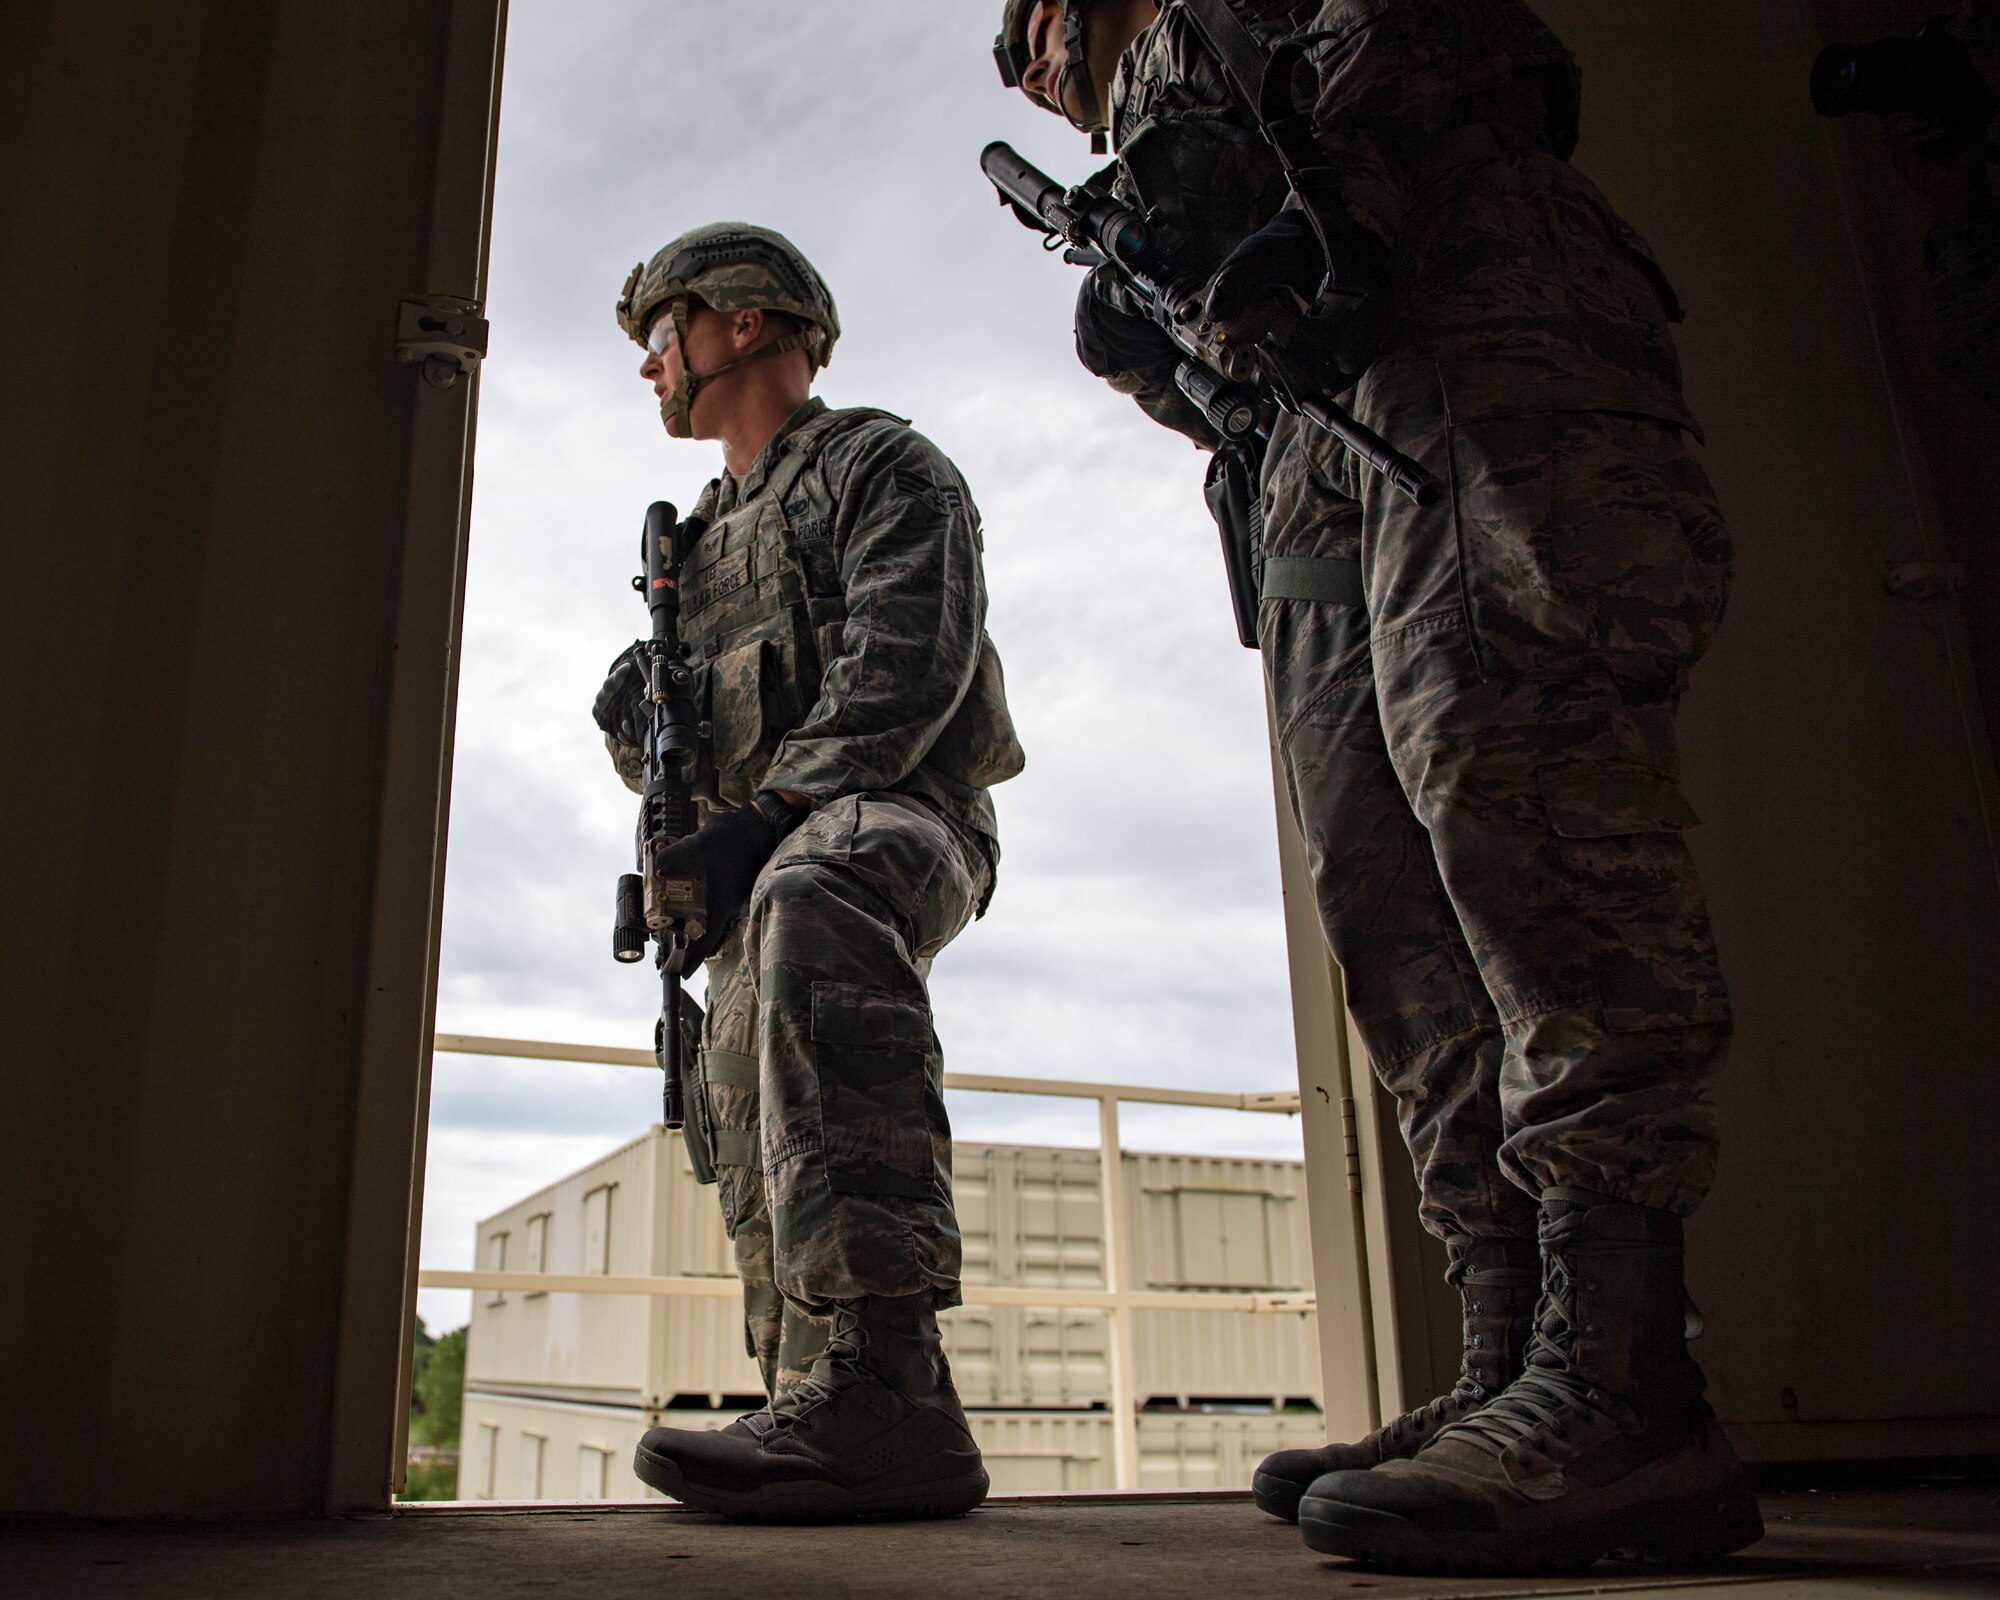 U.S. Air Force Senior Airman Aaron Lee, 9th Security Forces Squadron patrolman, and Airman 1st Class Jacob D’Agostino, 633rd Security Forces Squadron response force leader, clear a building during Air Combat Command’s Defender Challenge team selection at Joint Base Langley-Eustis, Virginia, August 20, 2018.